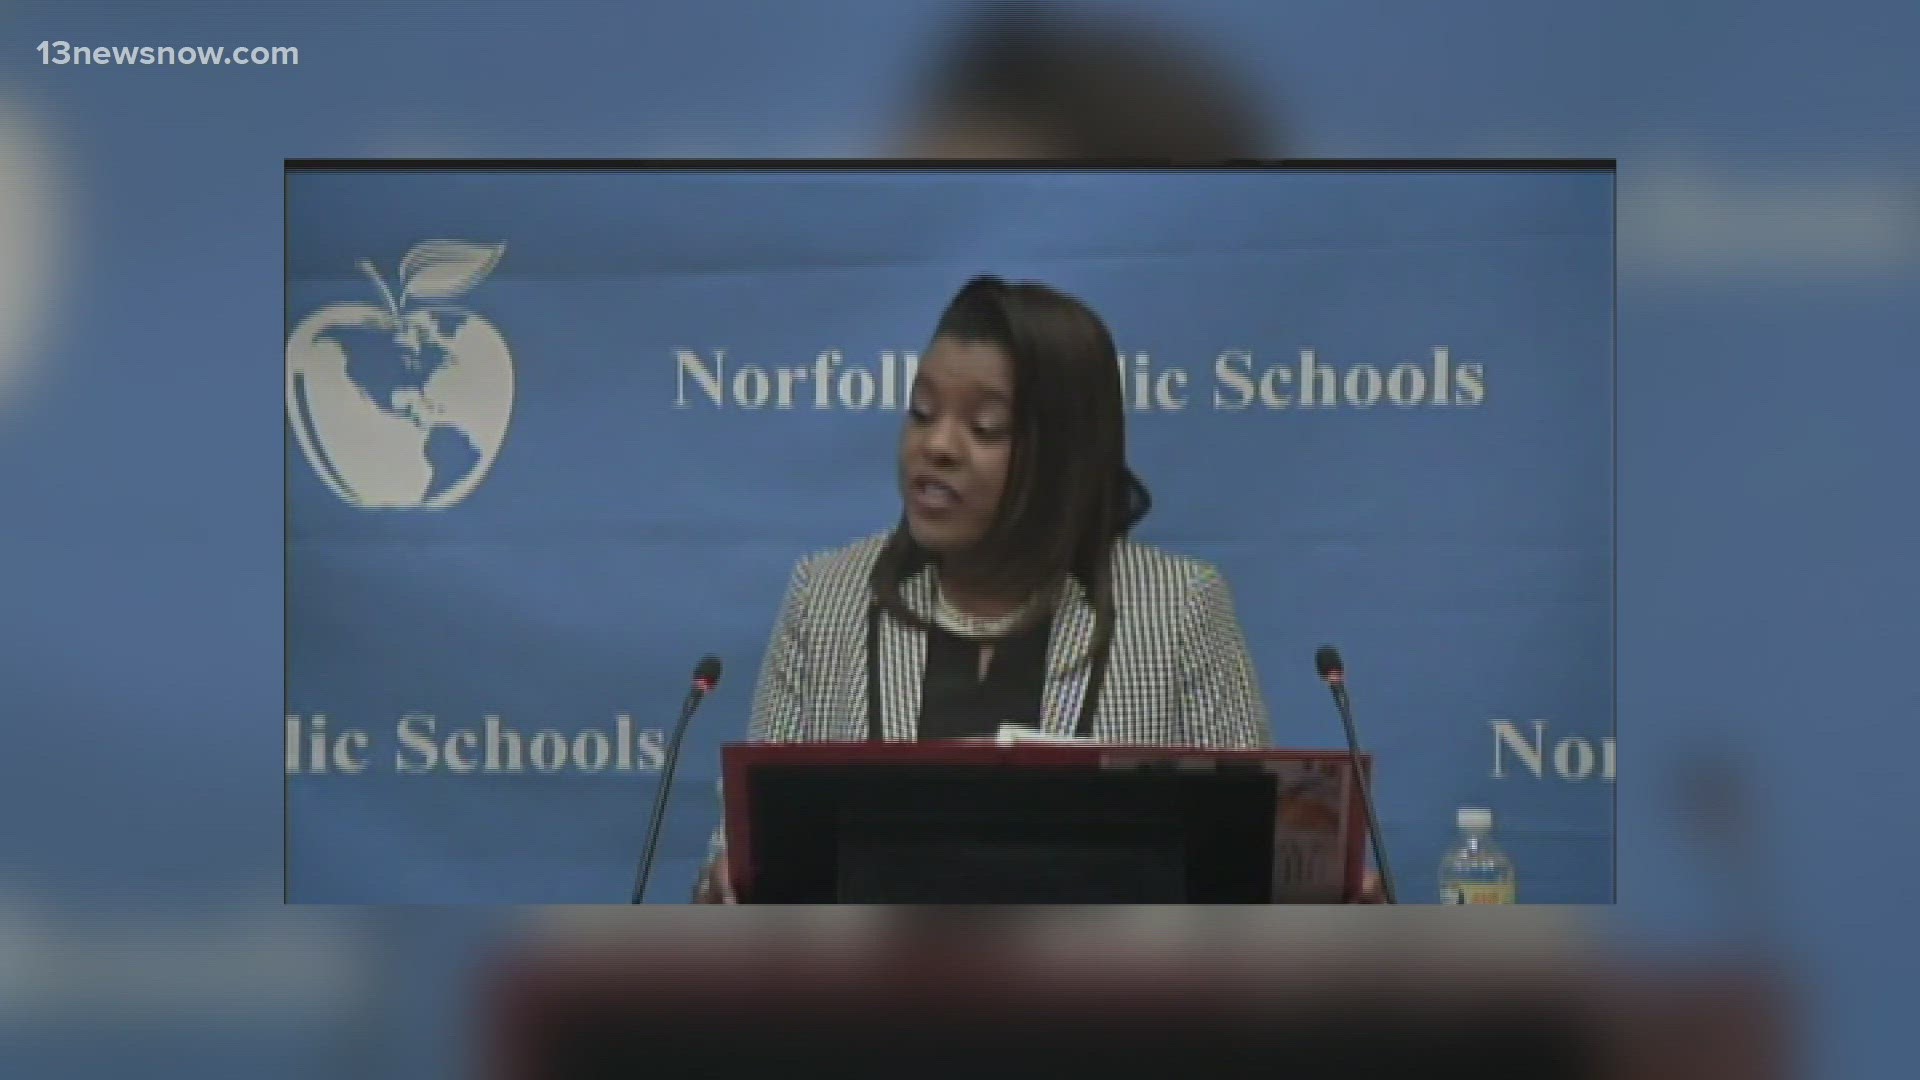 Changes may be coming to Norfolk Public Schools.